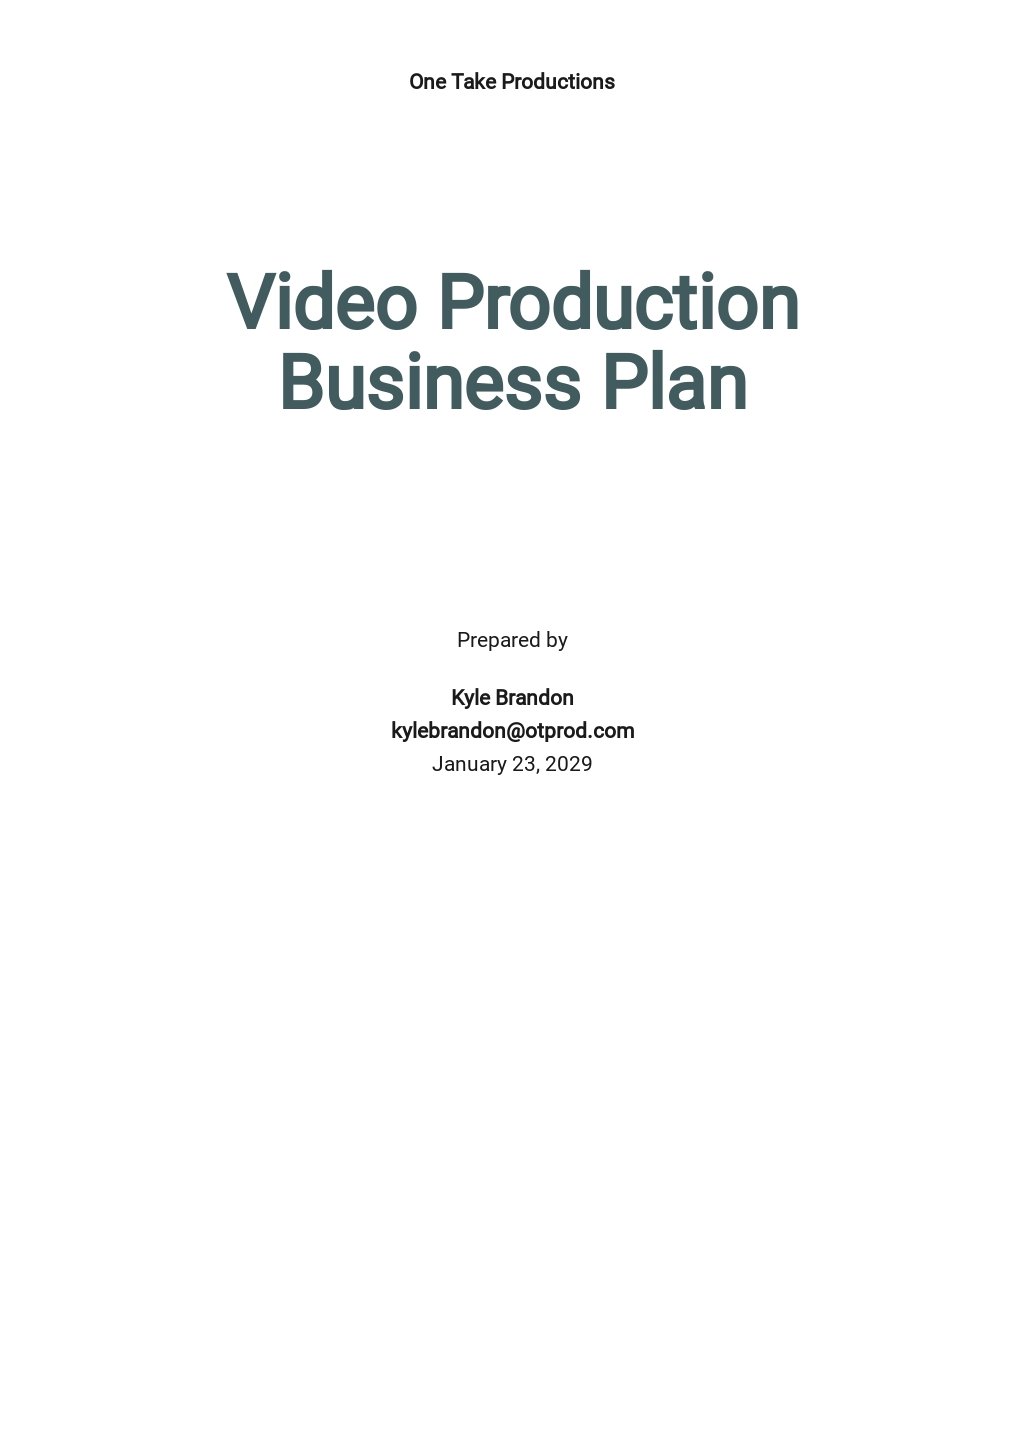 Video Production Business Plan Template.jpe